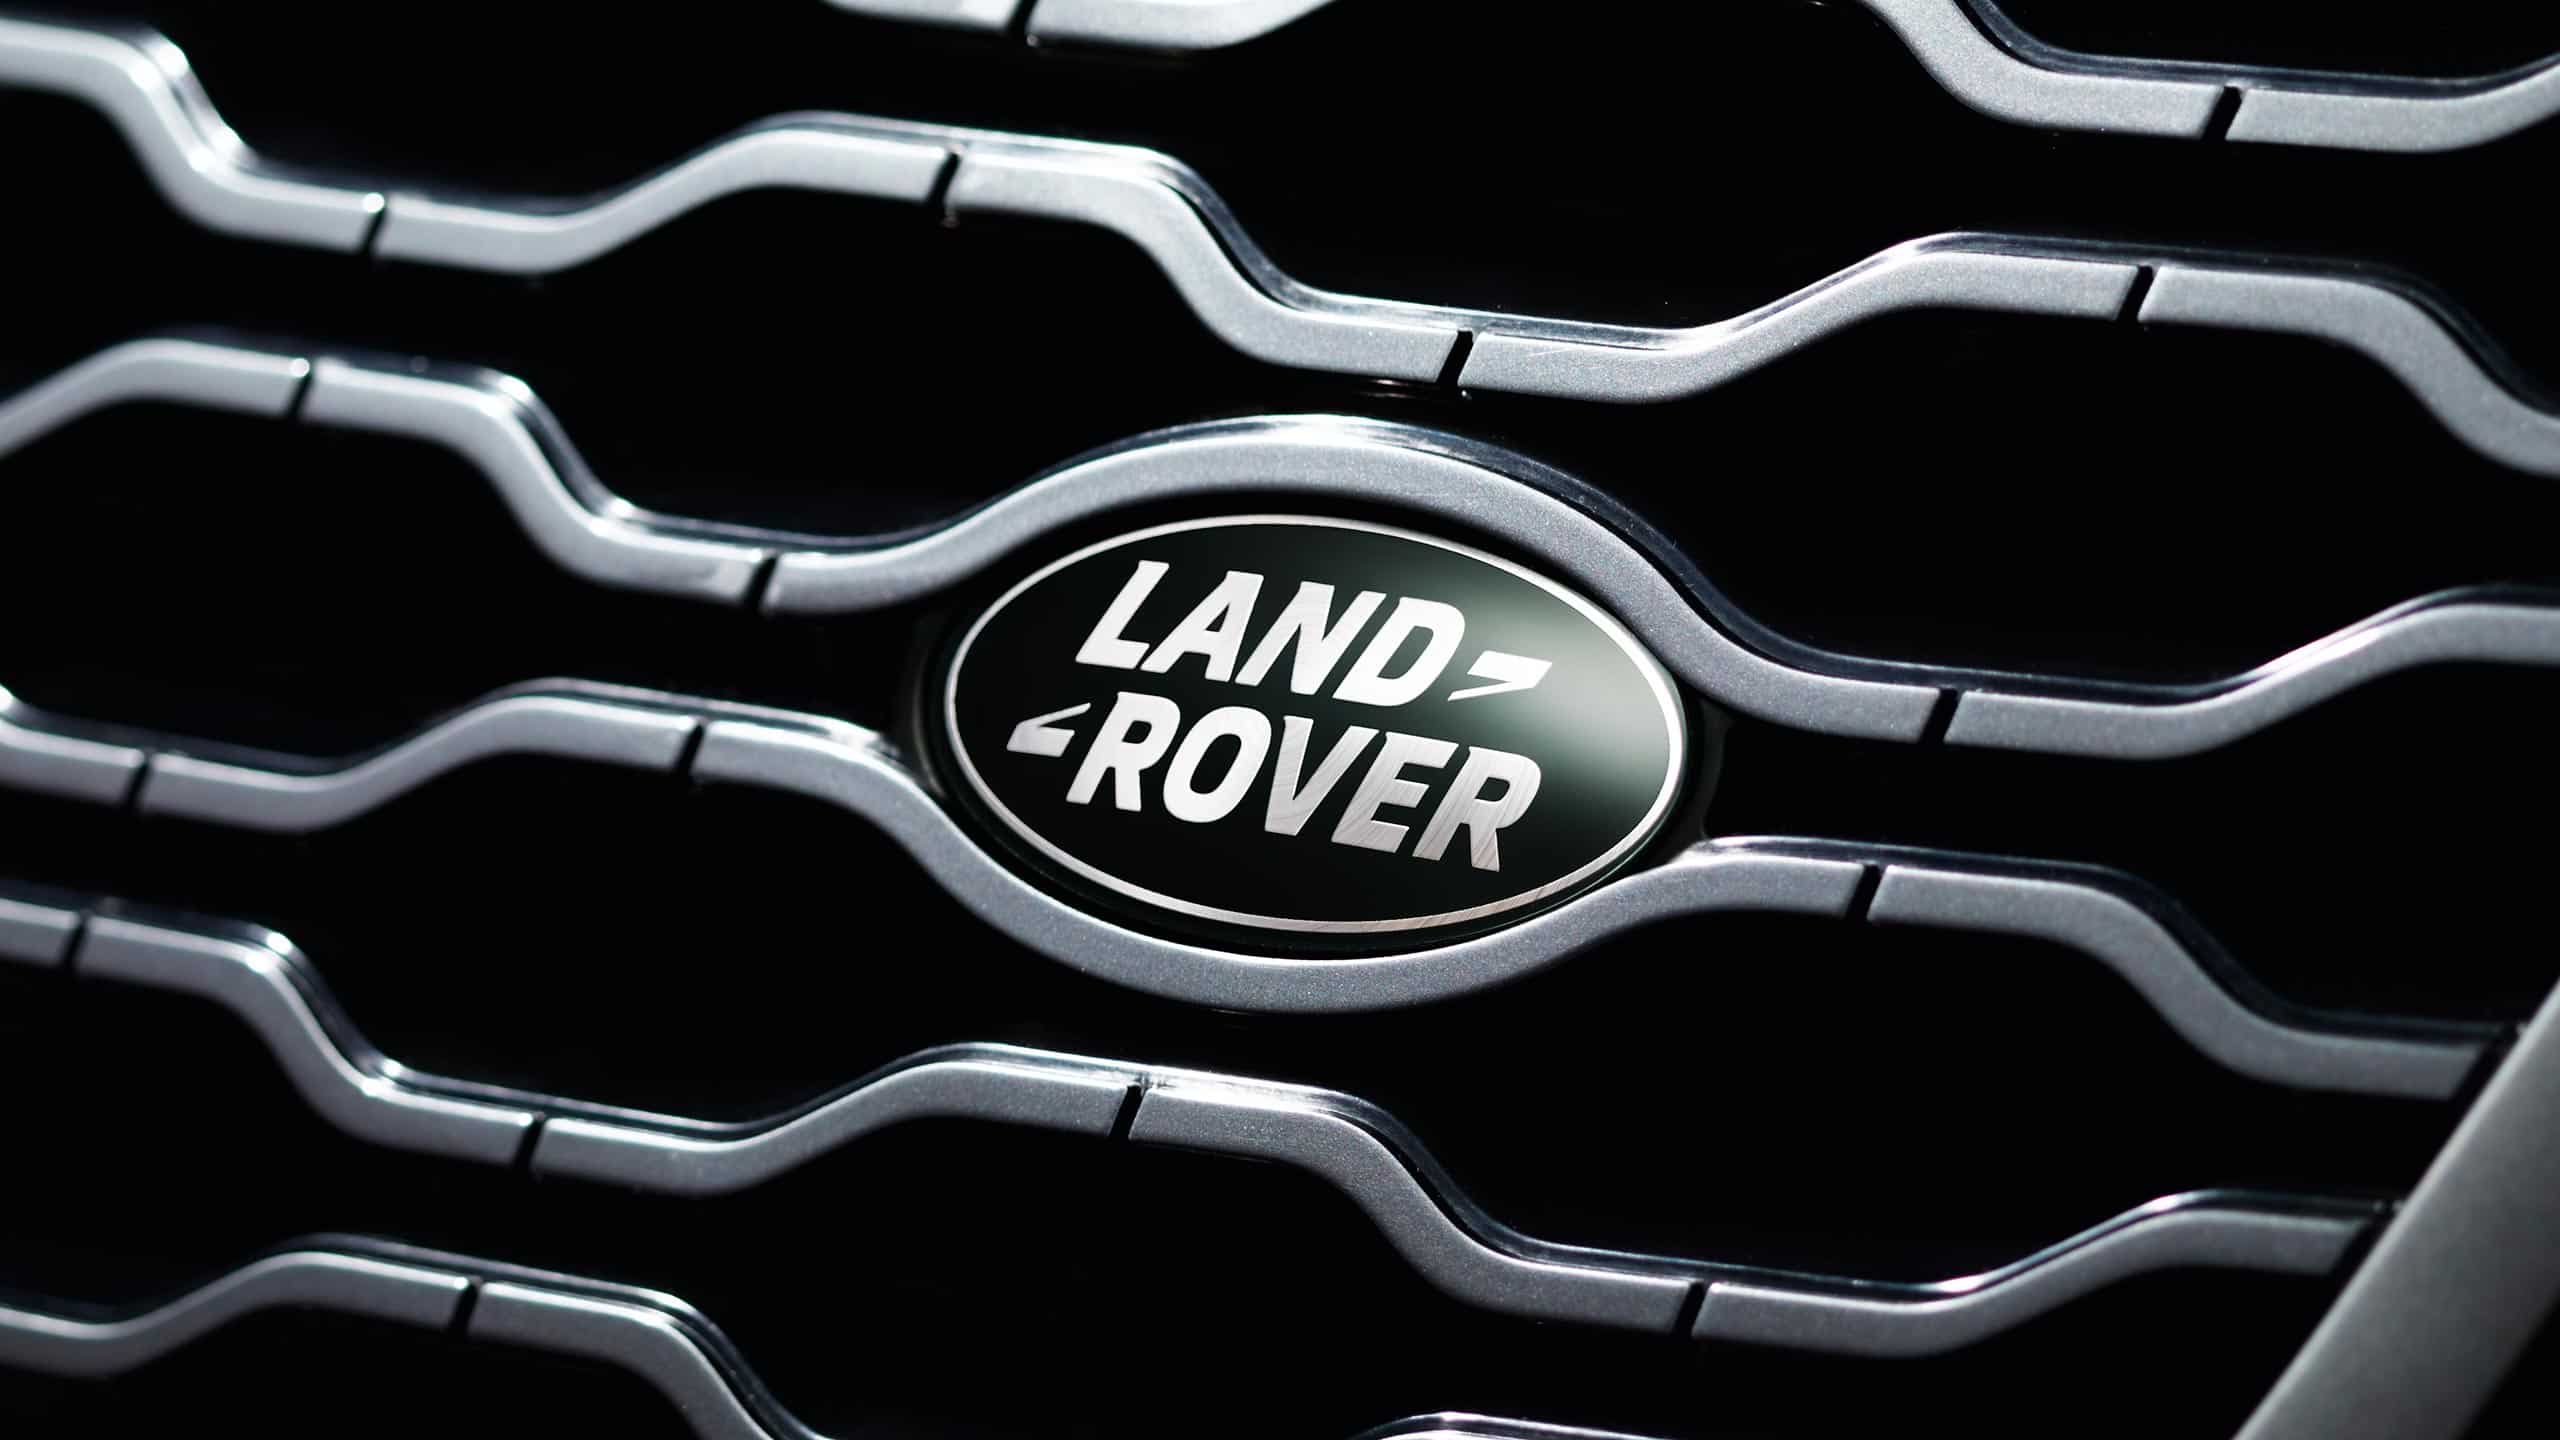 Land Rover Silver Grille